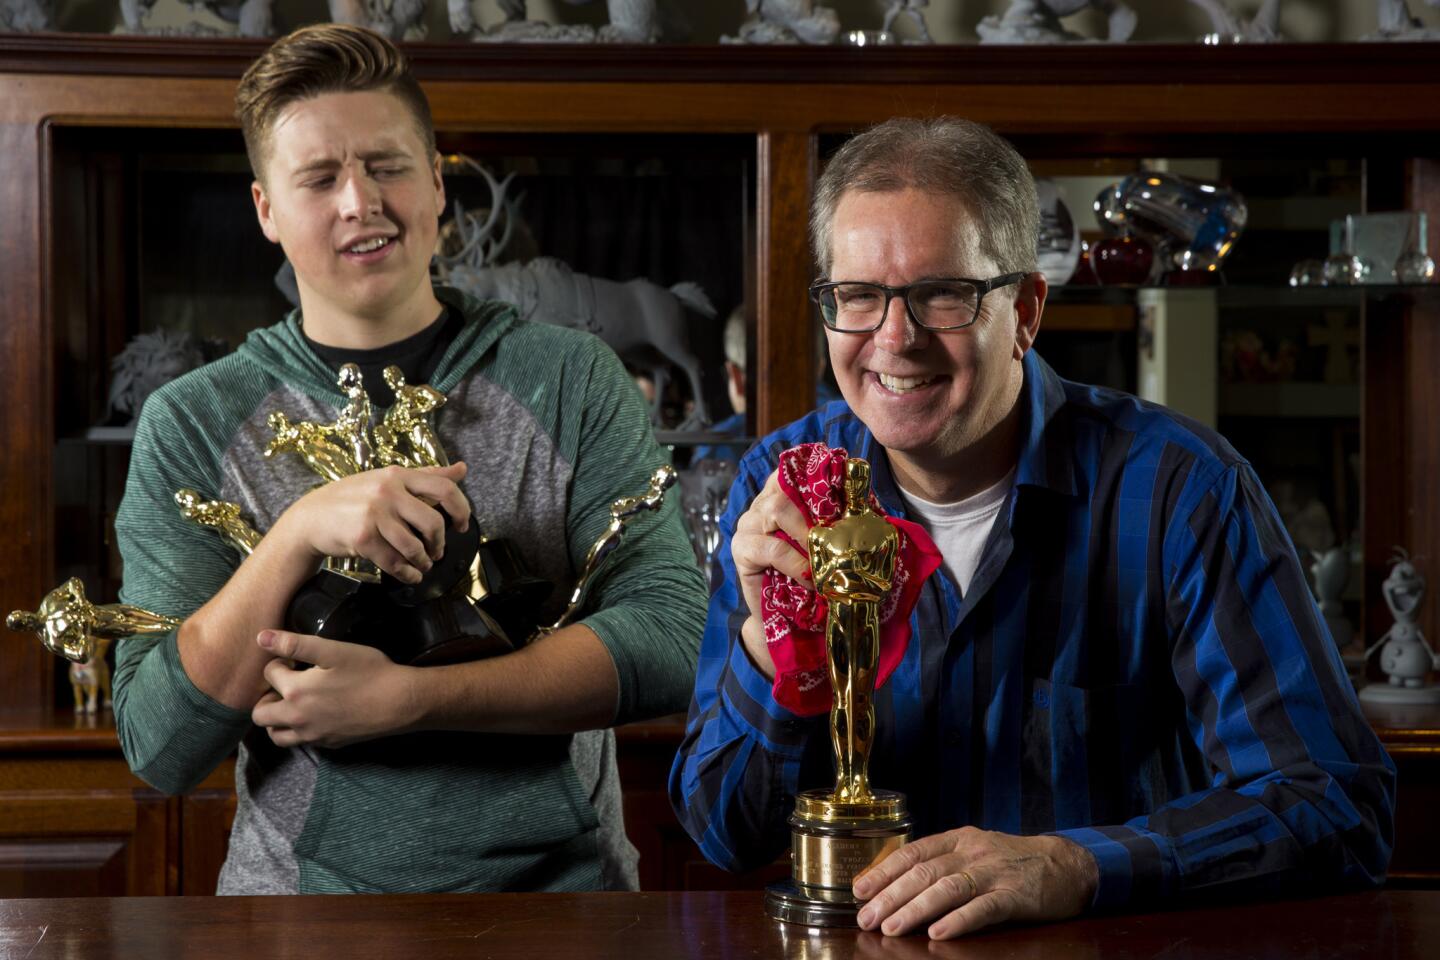 Chris Buck: His Oscar for co-directing "Frozen" with Jennifer Lee shares a place of honor with the statues his sons won acting in high school. He's pictured here with son Reed, 18.